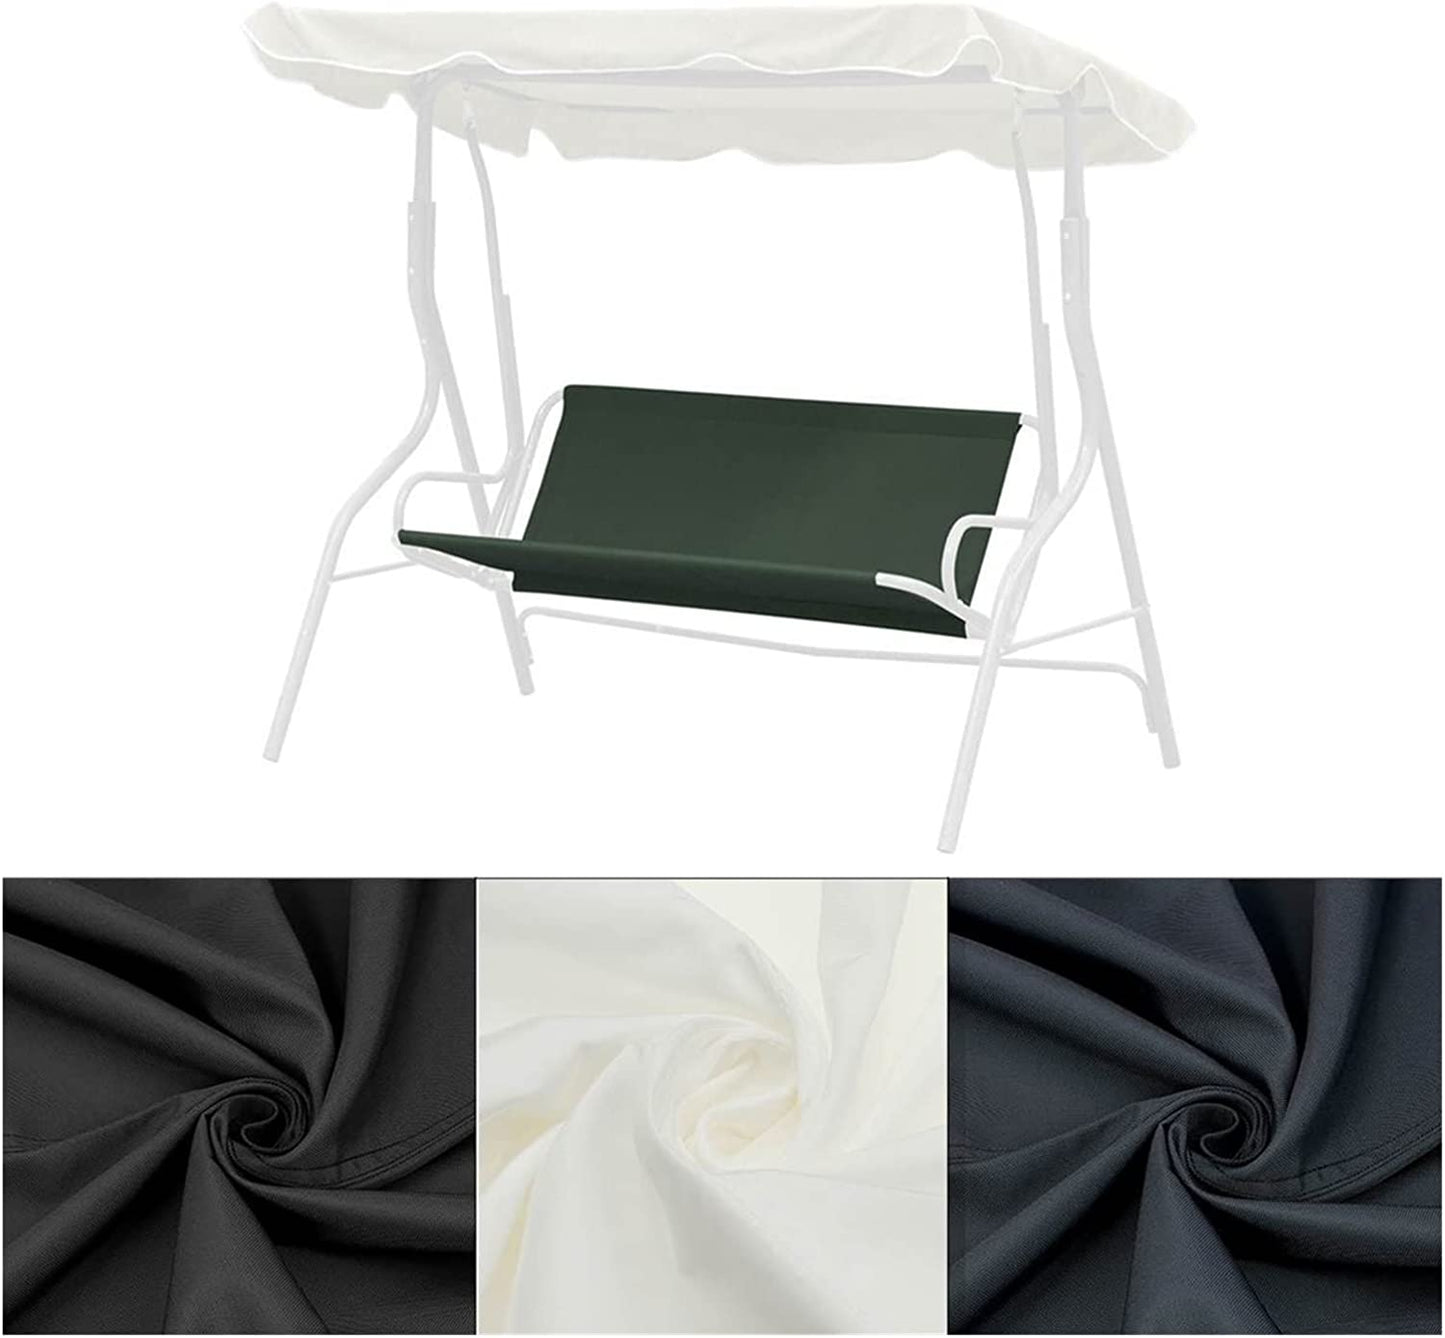 ZJYUUJE Outdoor Cushion Covers Waterproof Seater Waterproof Swing Cover,Chair Bench Replacement,Patio Garden Outdoor Swing Case Chair Cushion Backrest Cover Patio Swings with Canopy (Color : Black)